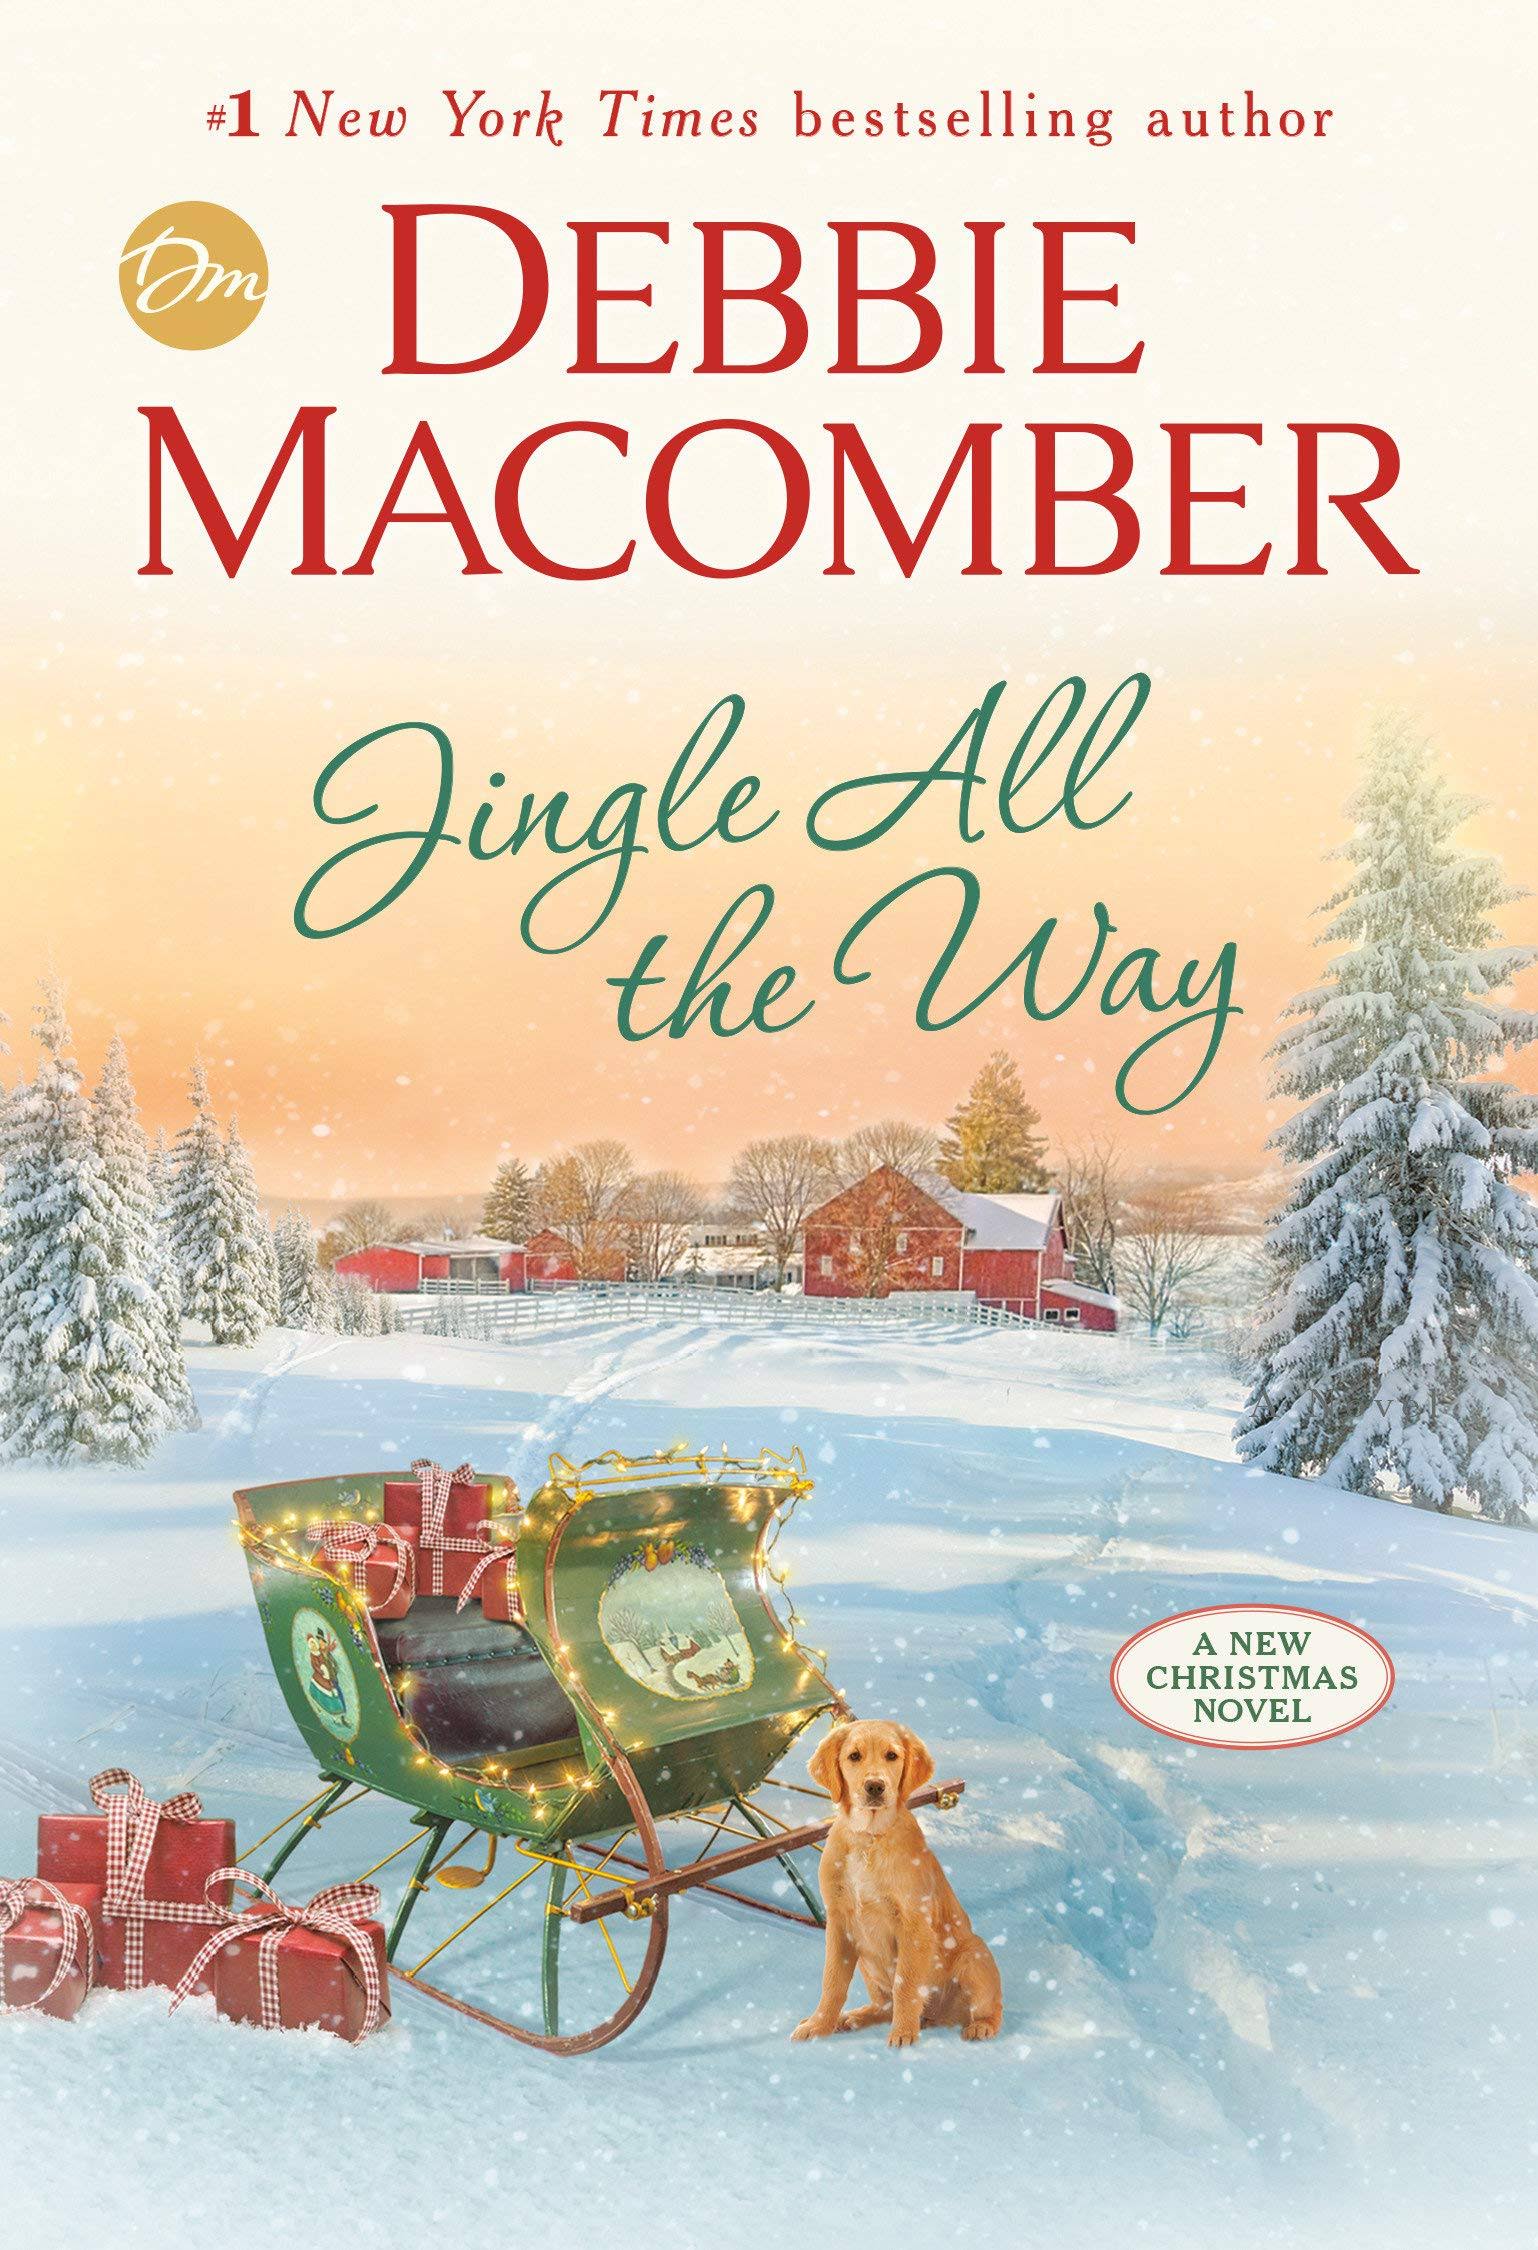 Jingle All The Way by Debbie Macomber